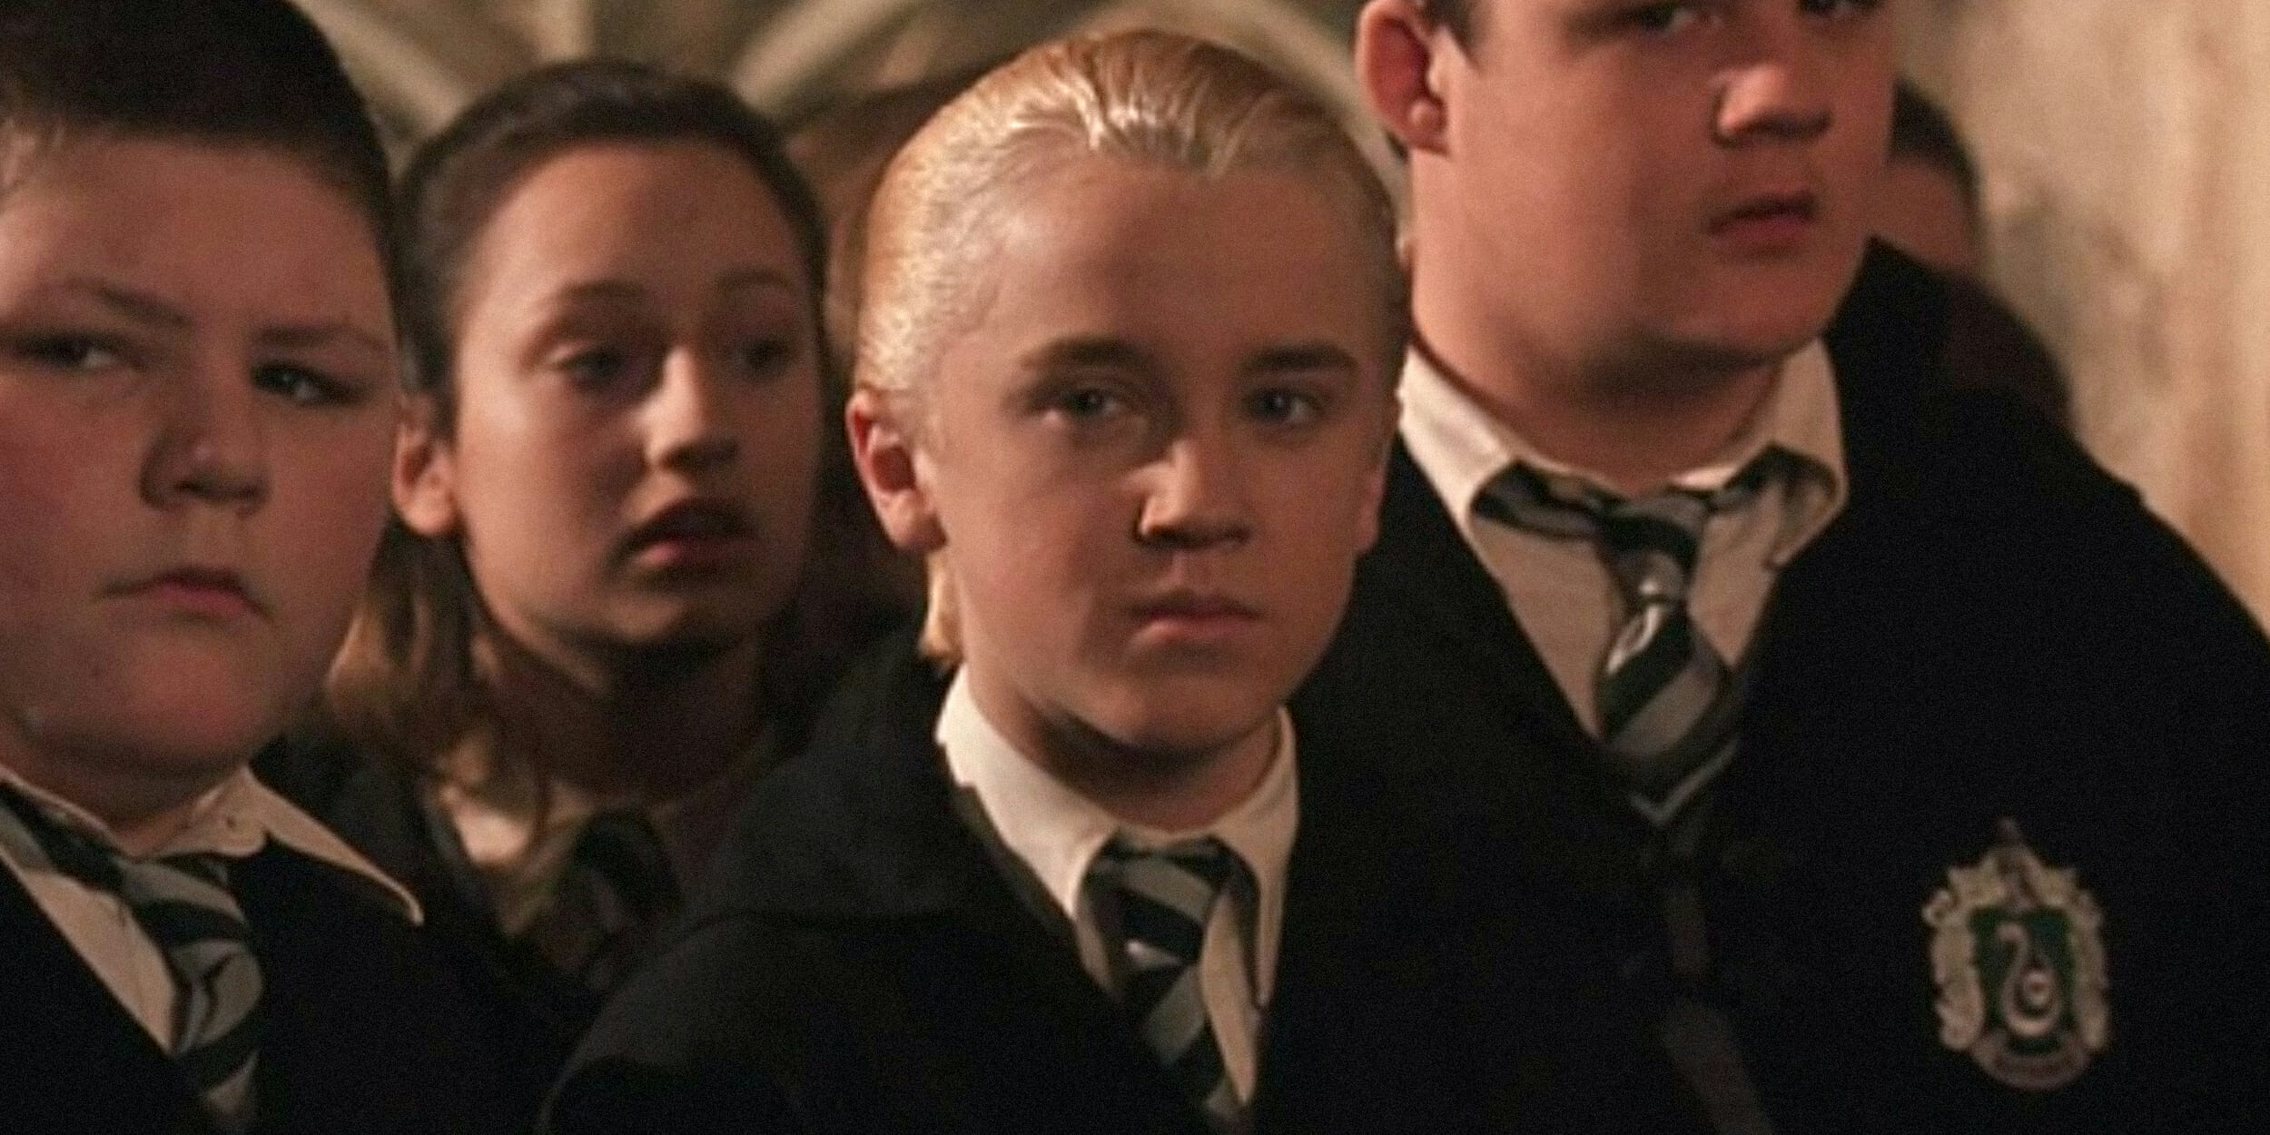 Harry Potter: 10 Memes That Perfectly Sum Up Draco Malfoy